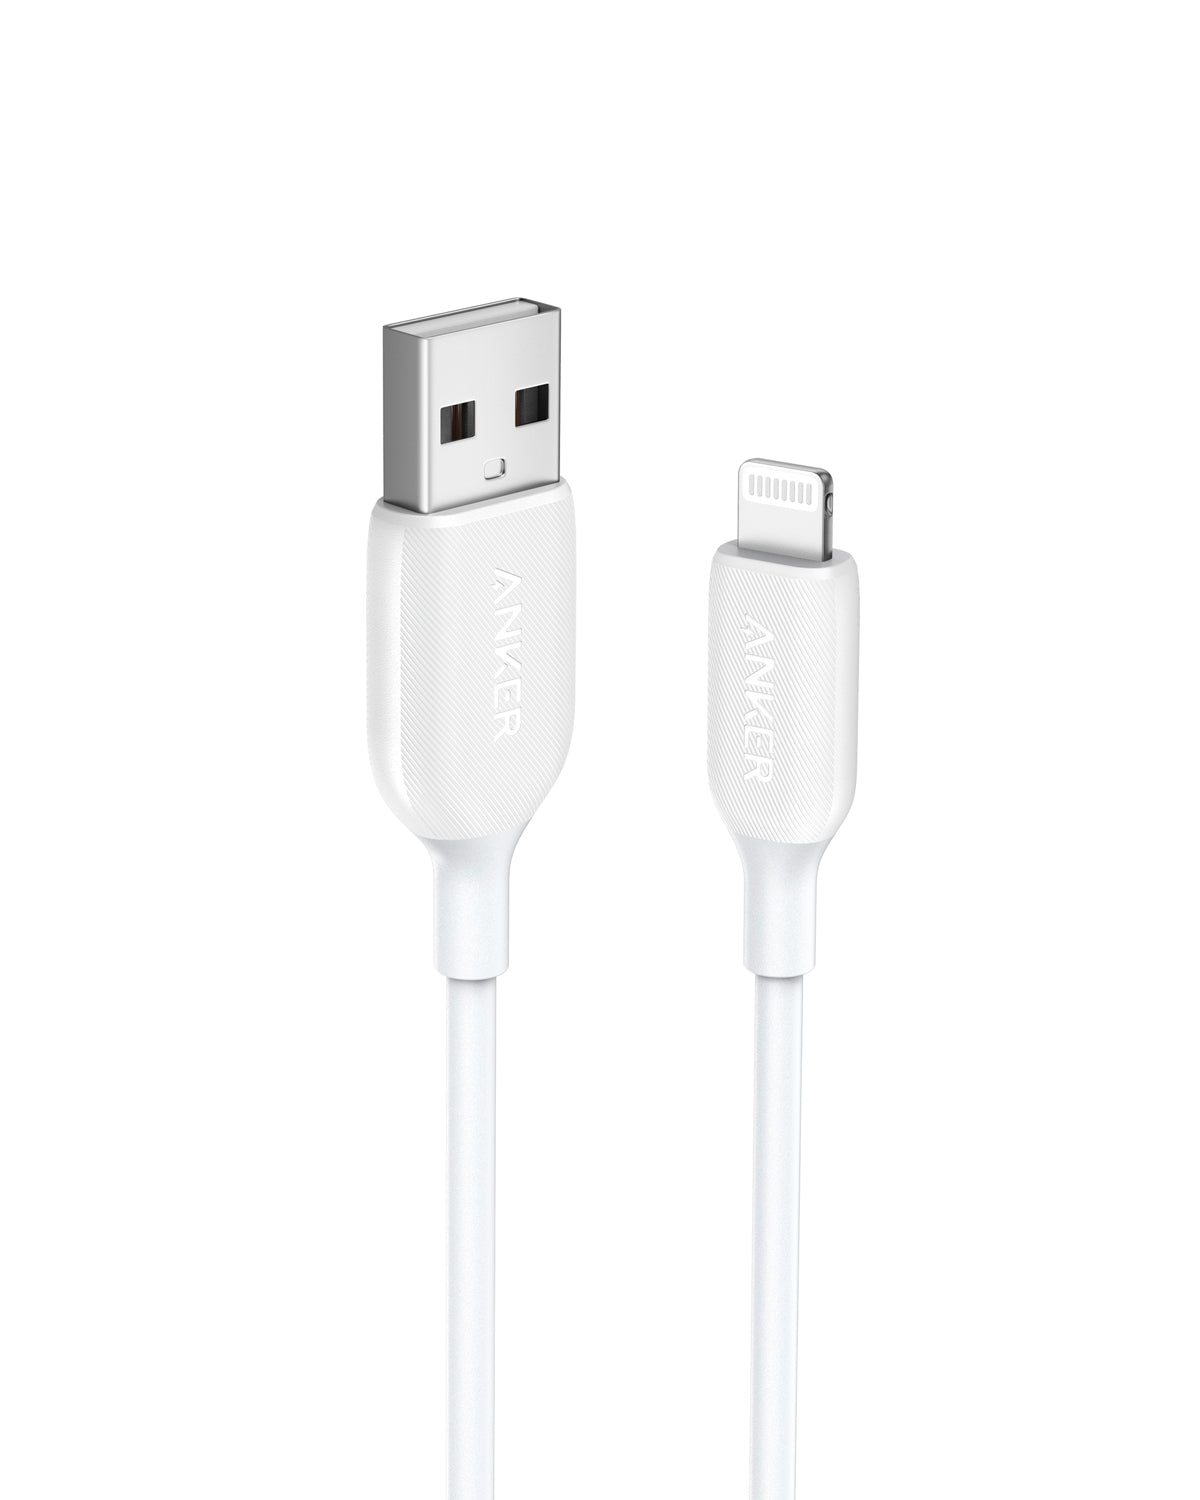 Lightning to USB Cable - 10ft/3m 